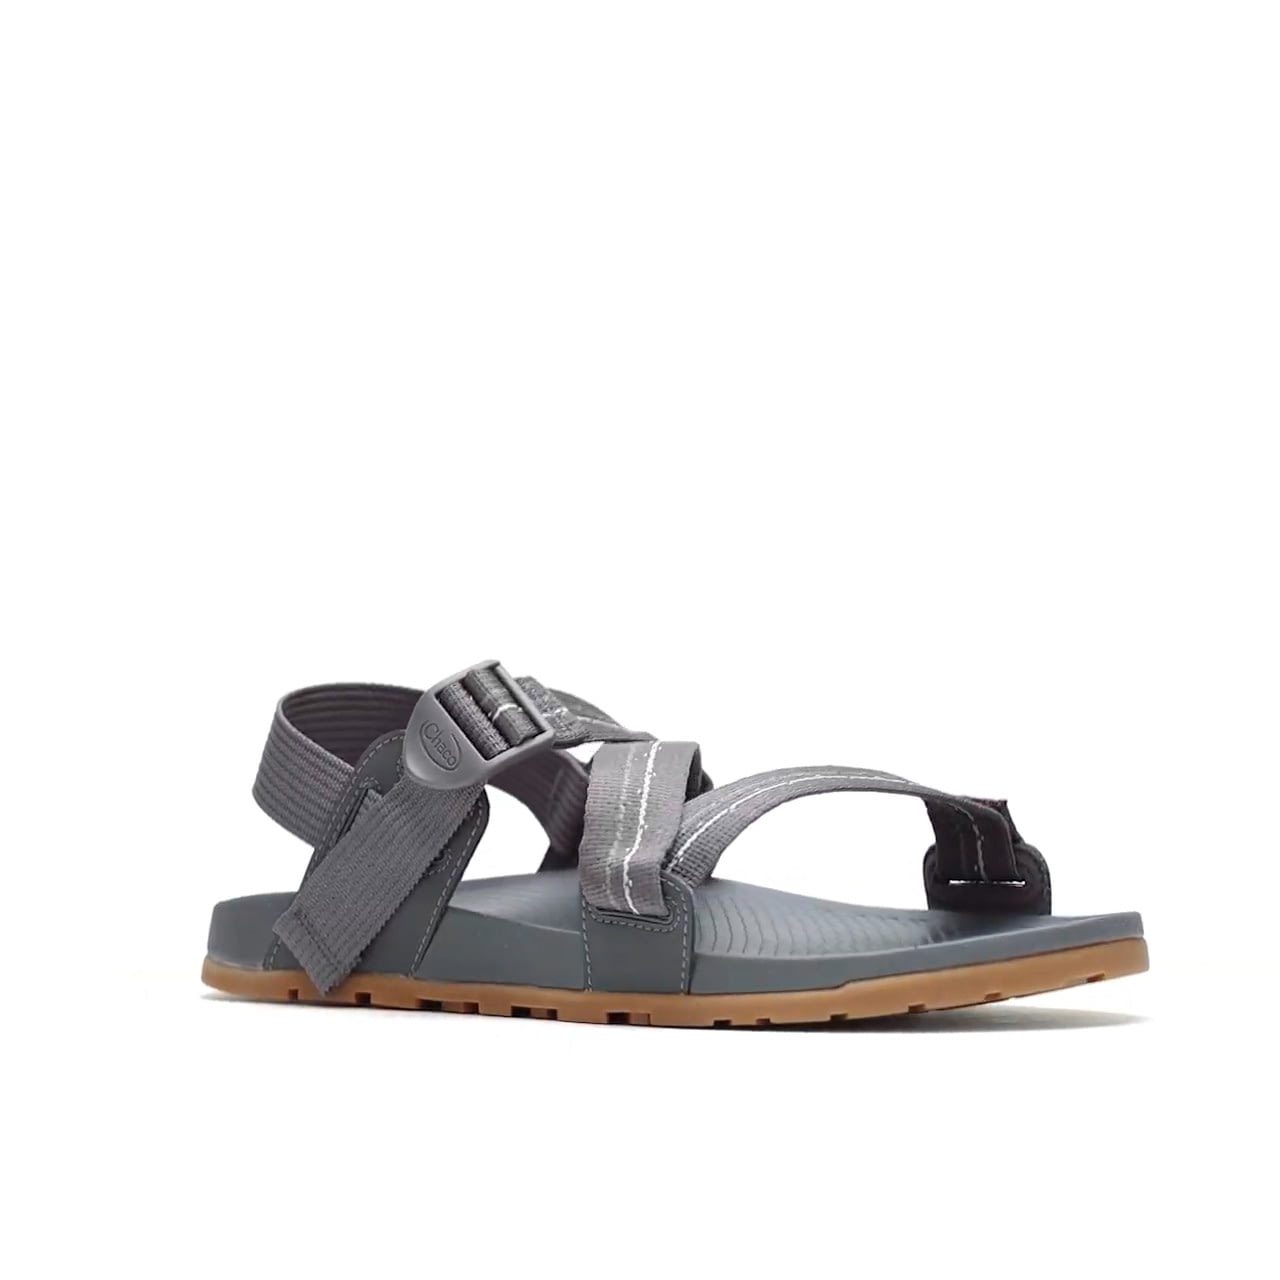 opplanet chaco lowdown mens sandals 360 view video